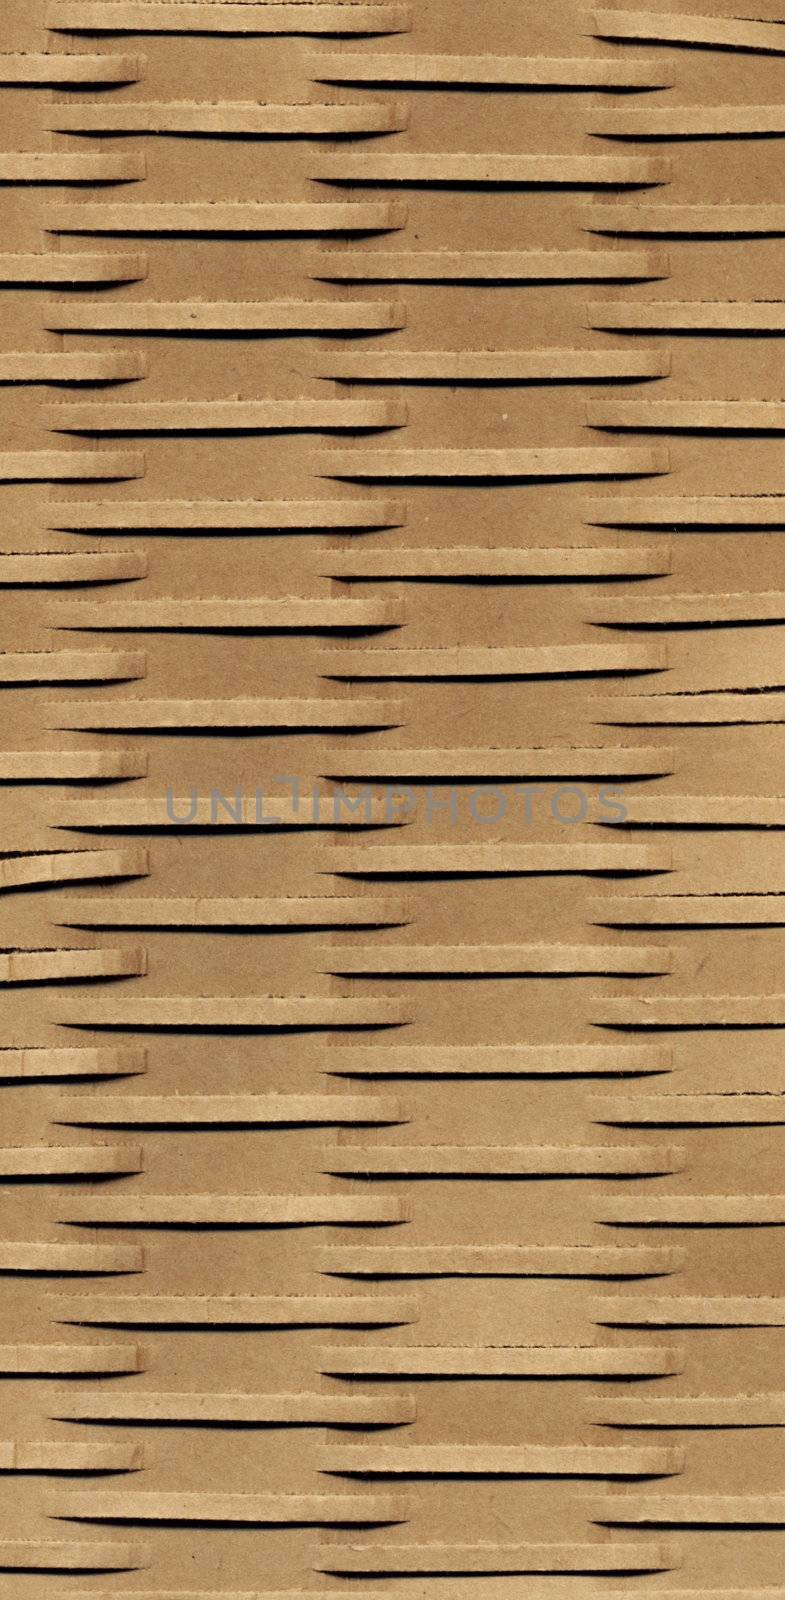 packaging cardboard usefull as a background image